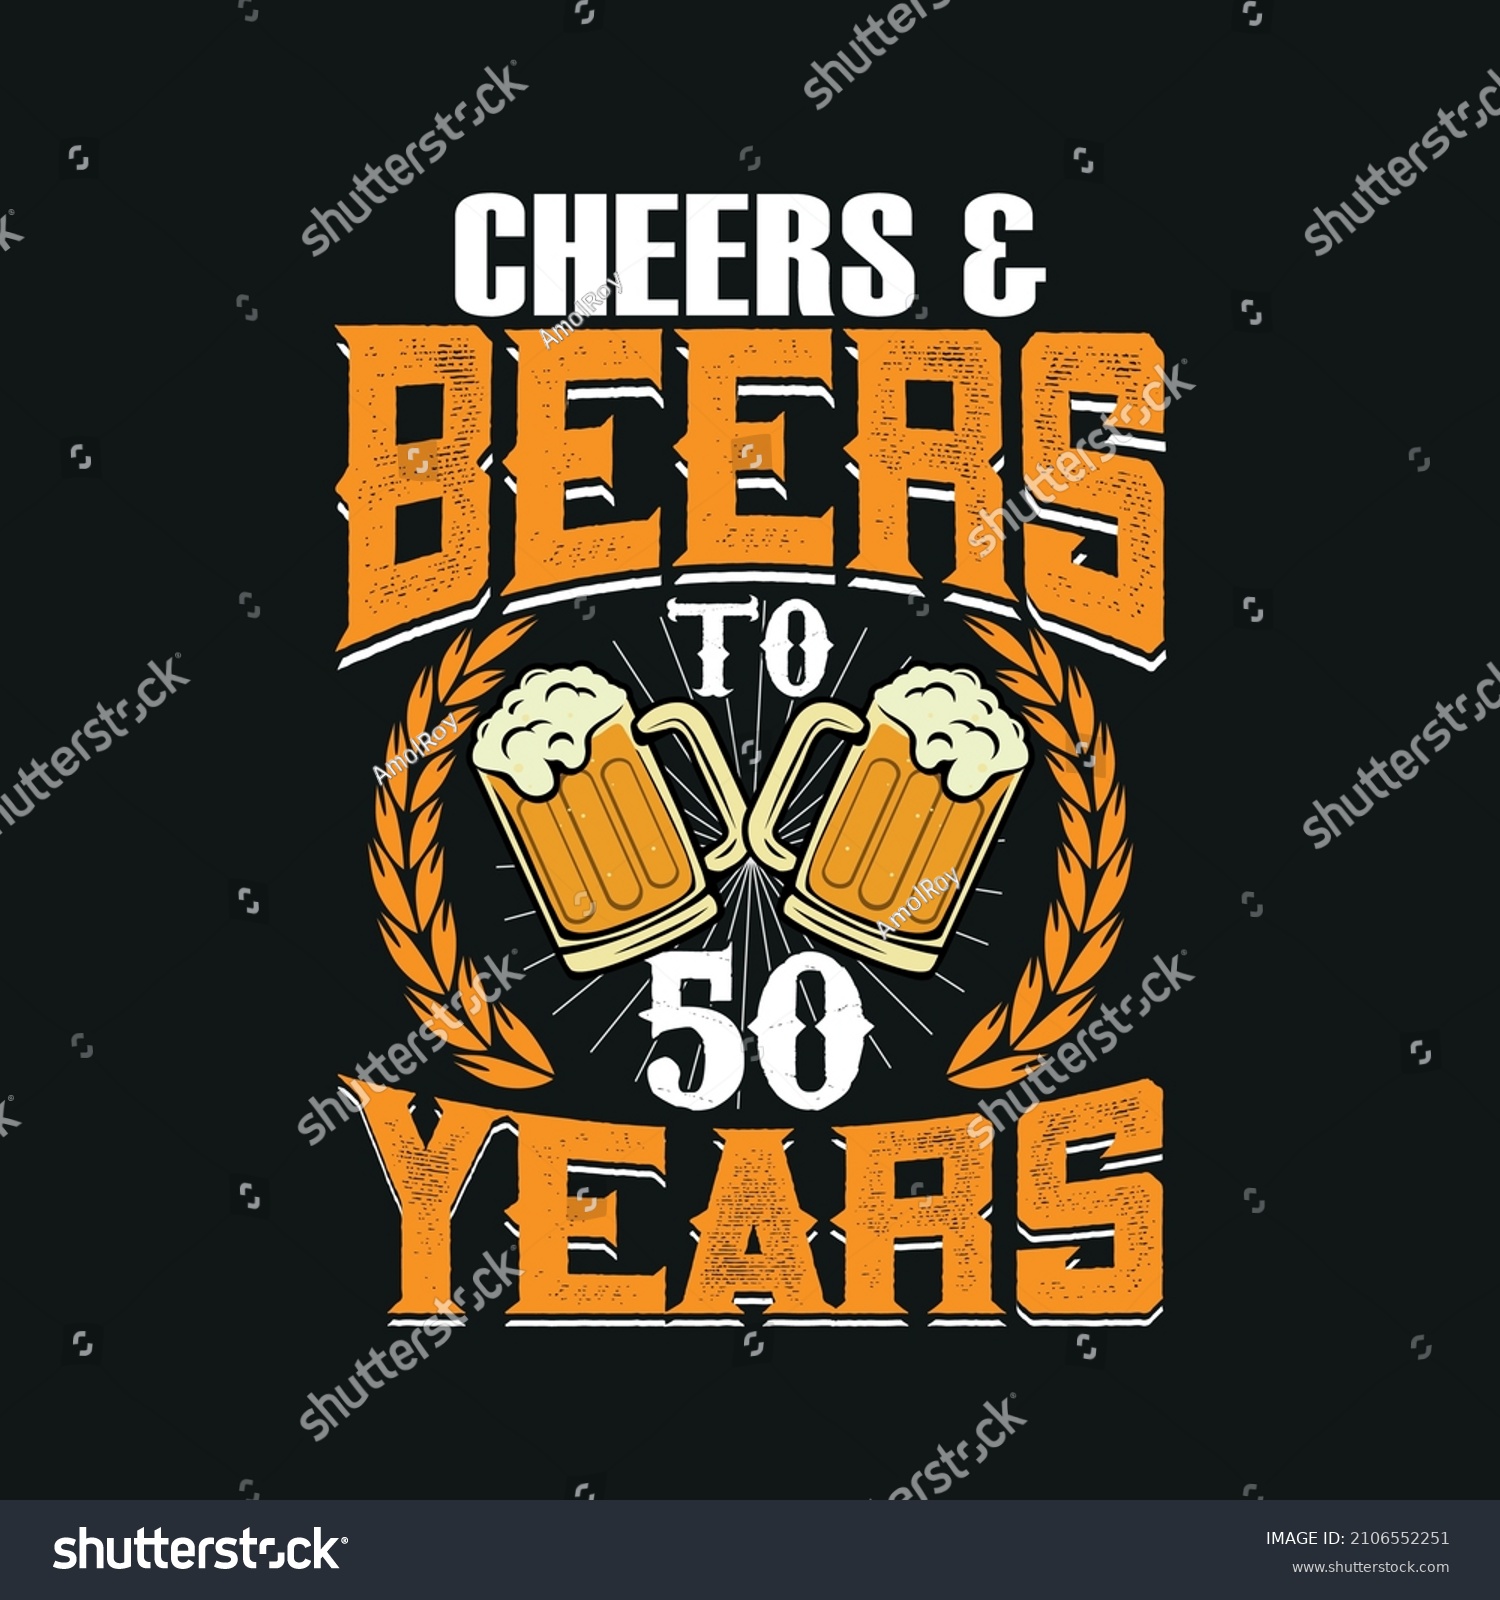 SVG of Cheers And Beers To 50 Years vintage 50 years Birthday design vector illustration eps svg